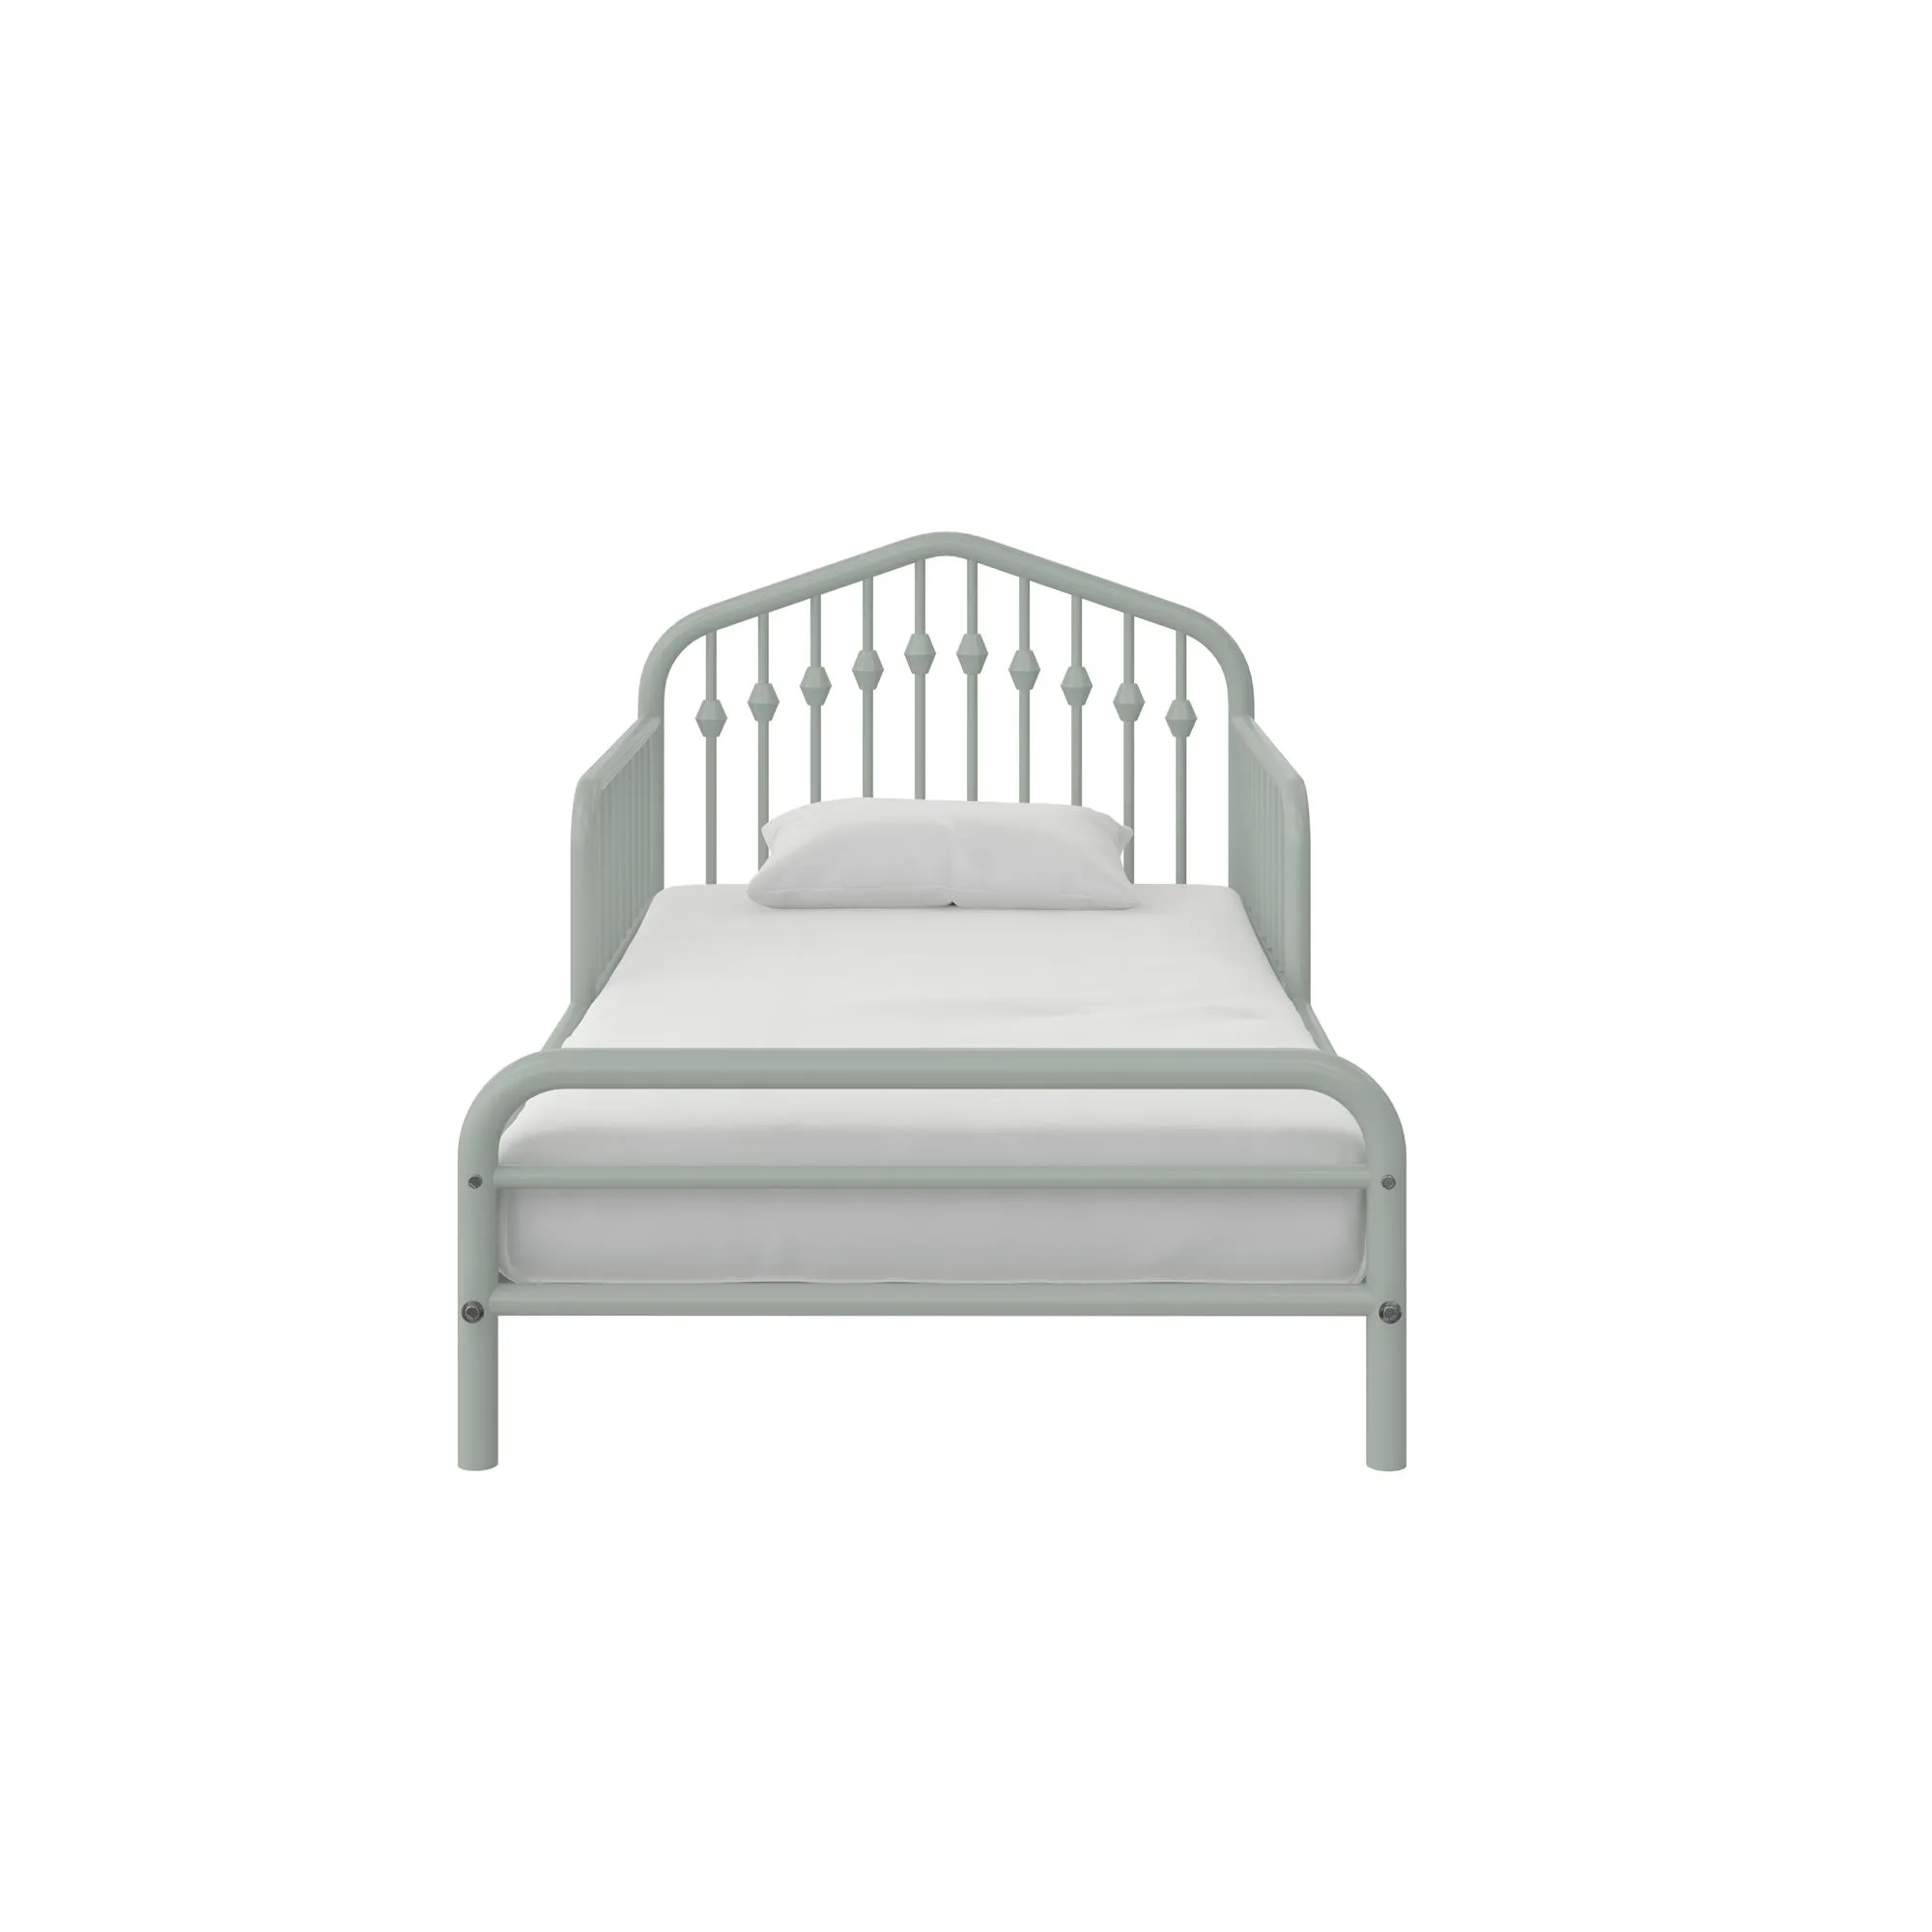 Bushwick Metal Toddler Bed with Safety Rails